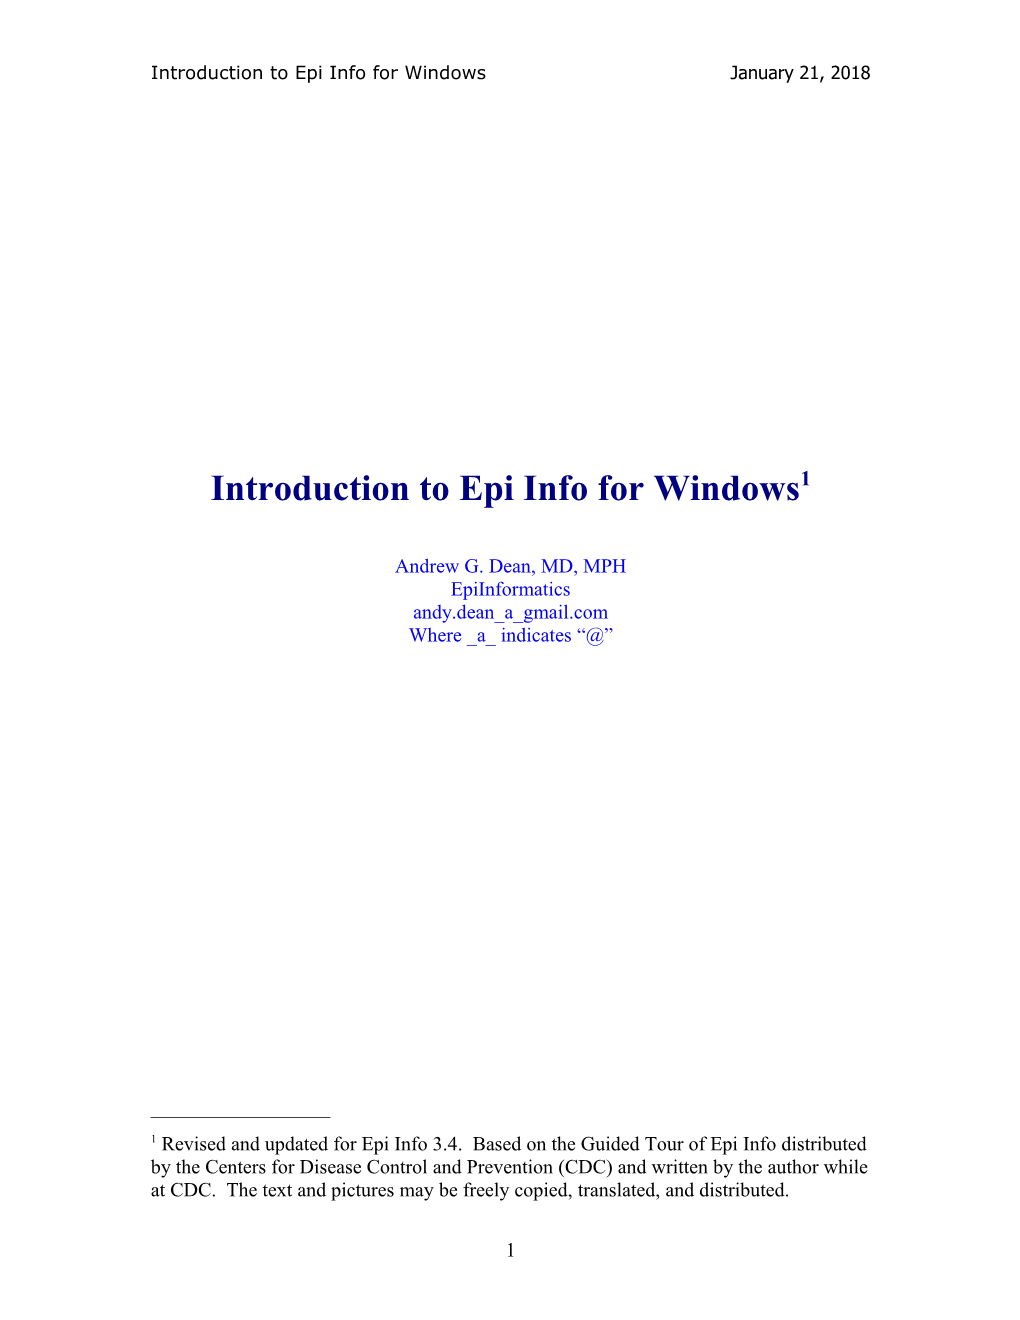 Introduction to Epi Info for Windows March 18, 2007